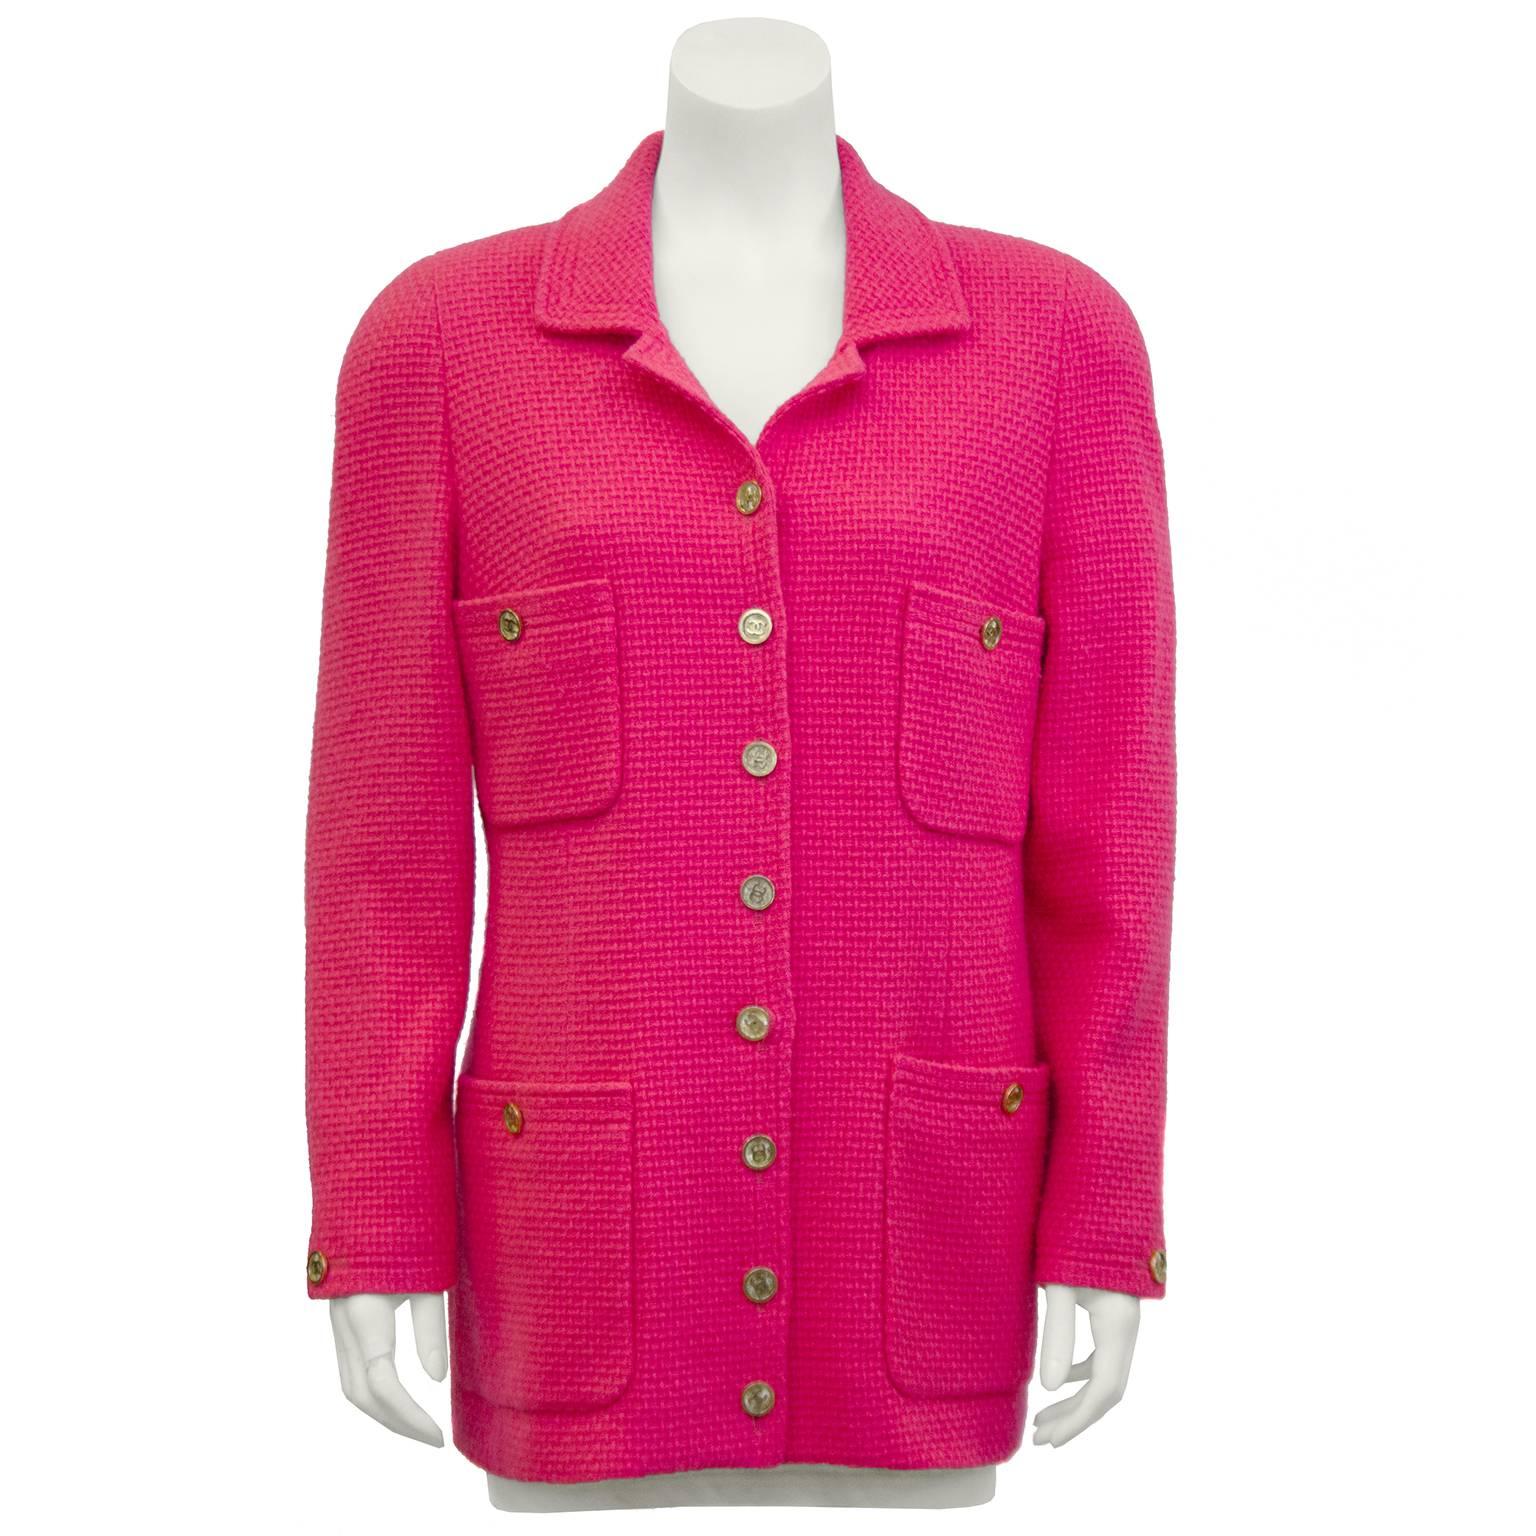 1980s classic Chanel jacket in a beautiful bright magenta pink. Boucle with gold Chanel buttons and four patch pockets. Matching magenta silk lining with small cc logos throughout.  Excellent vintage condition, fits like a US 8. 

Sleeve 17"